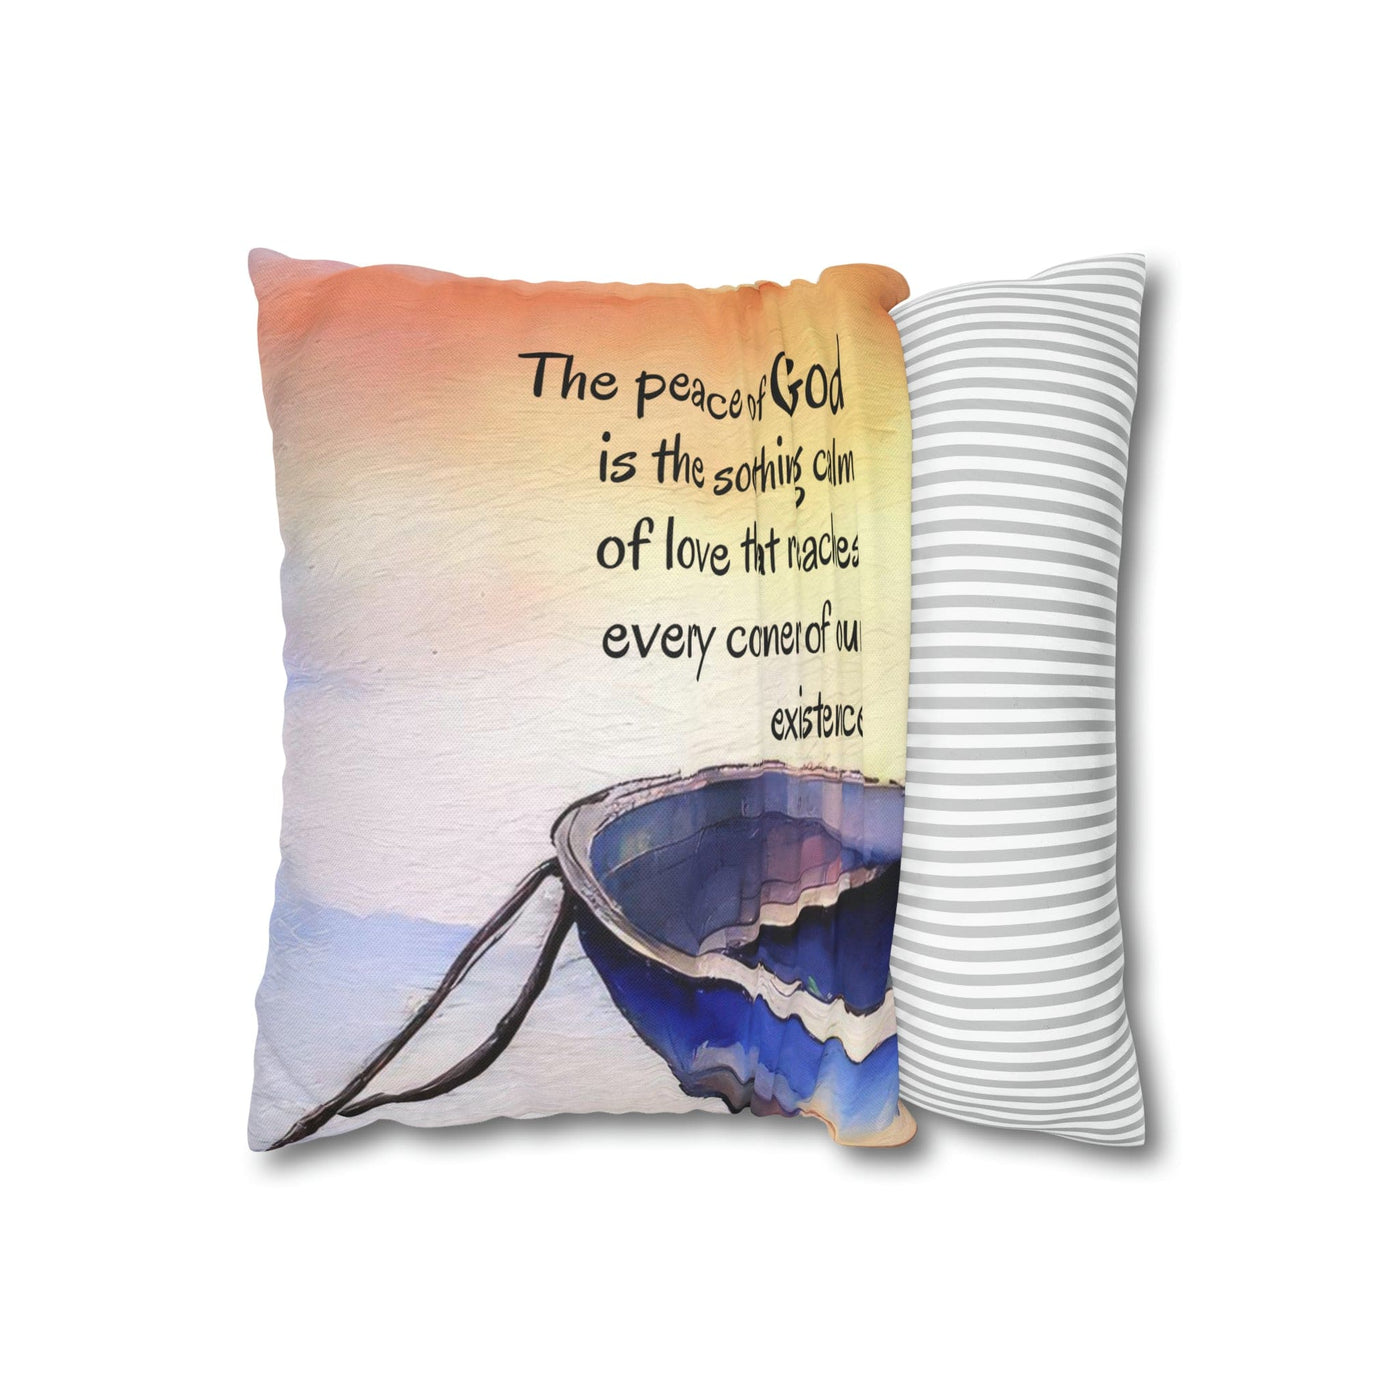 Decorative Throw Pillow Cover The Peace Of God Soothing Calm Illustration